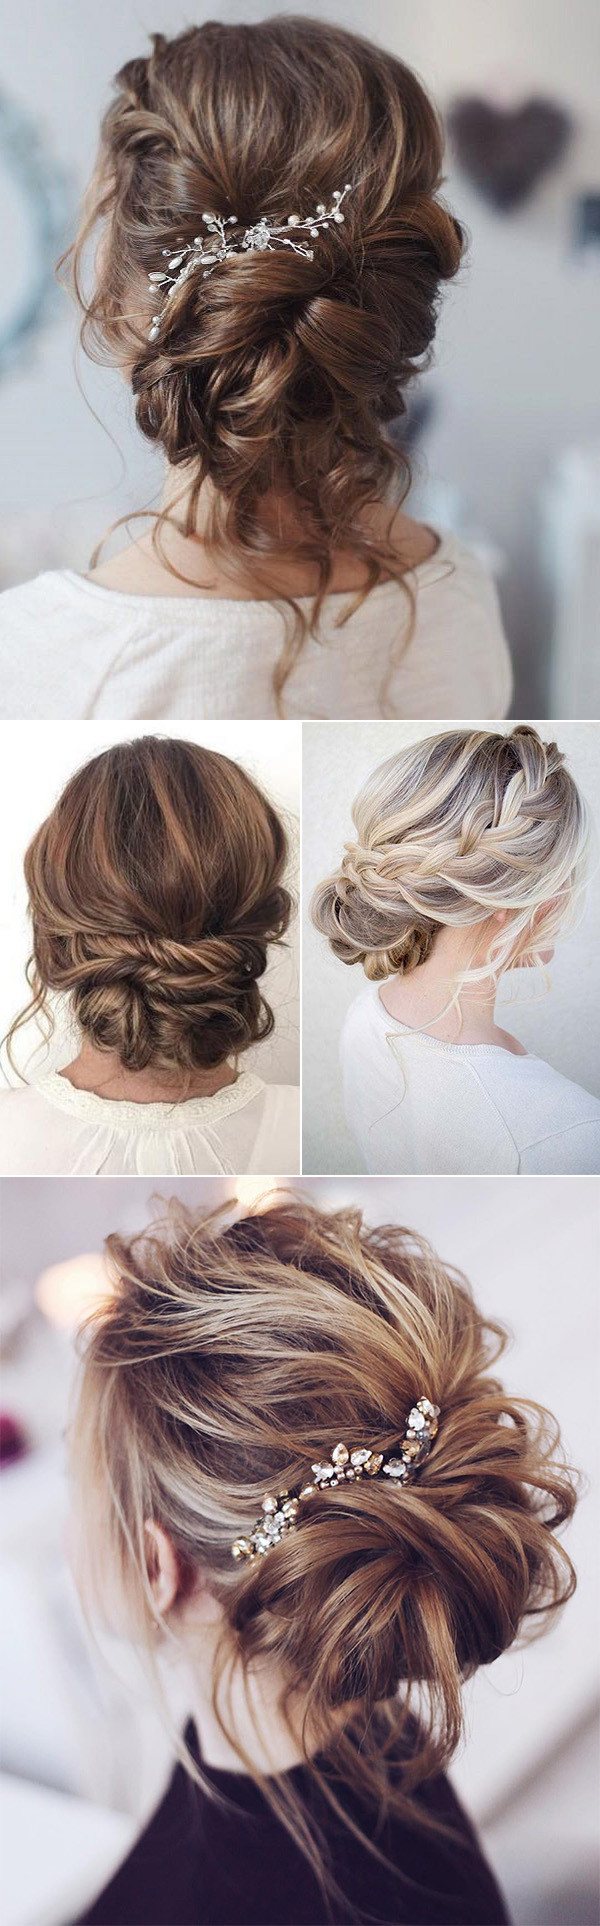 Hairstyle Updos
 25 Drop Dead Bridal Updo Hairstyles Ideas for Any Wedding